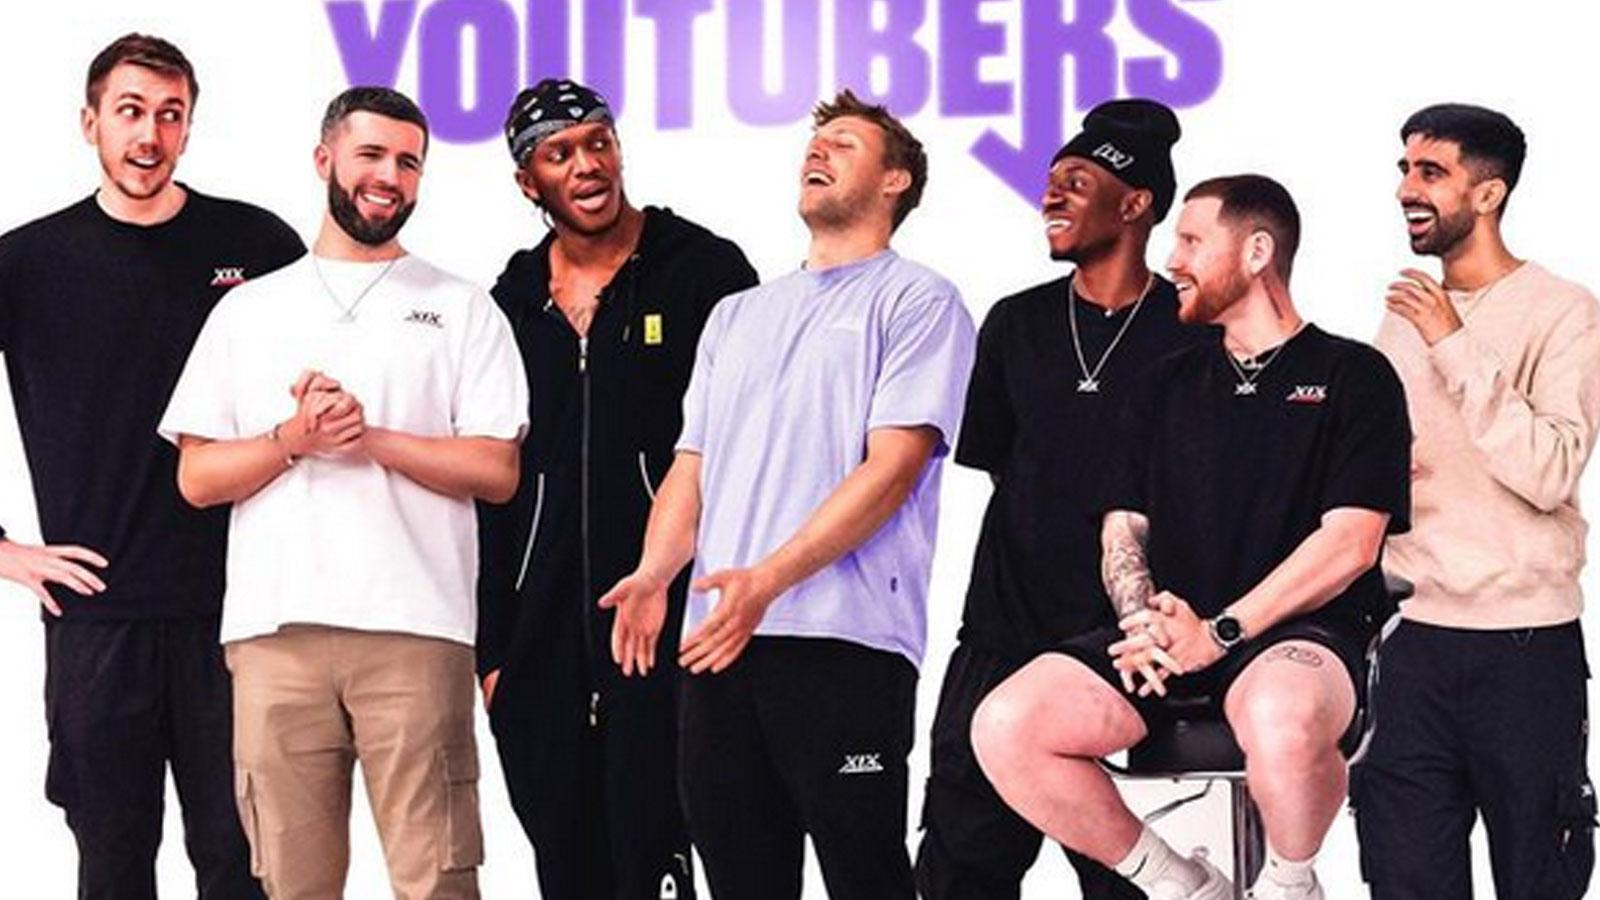 The full Sidemen group stood in front of white background